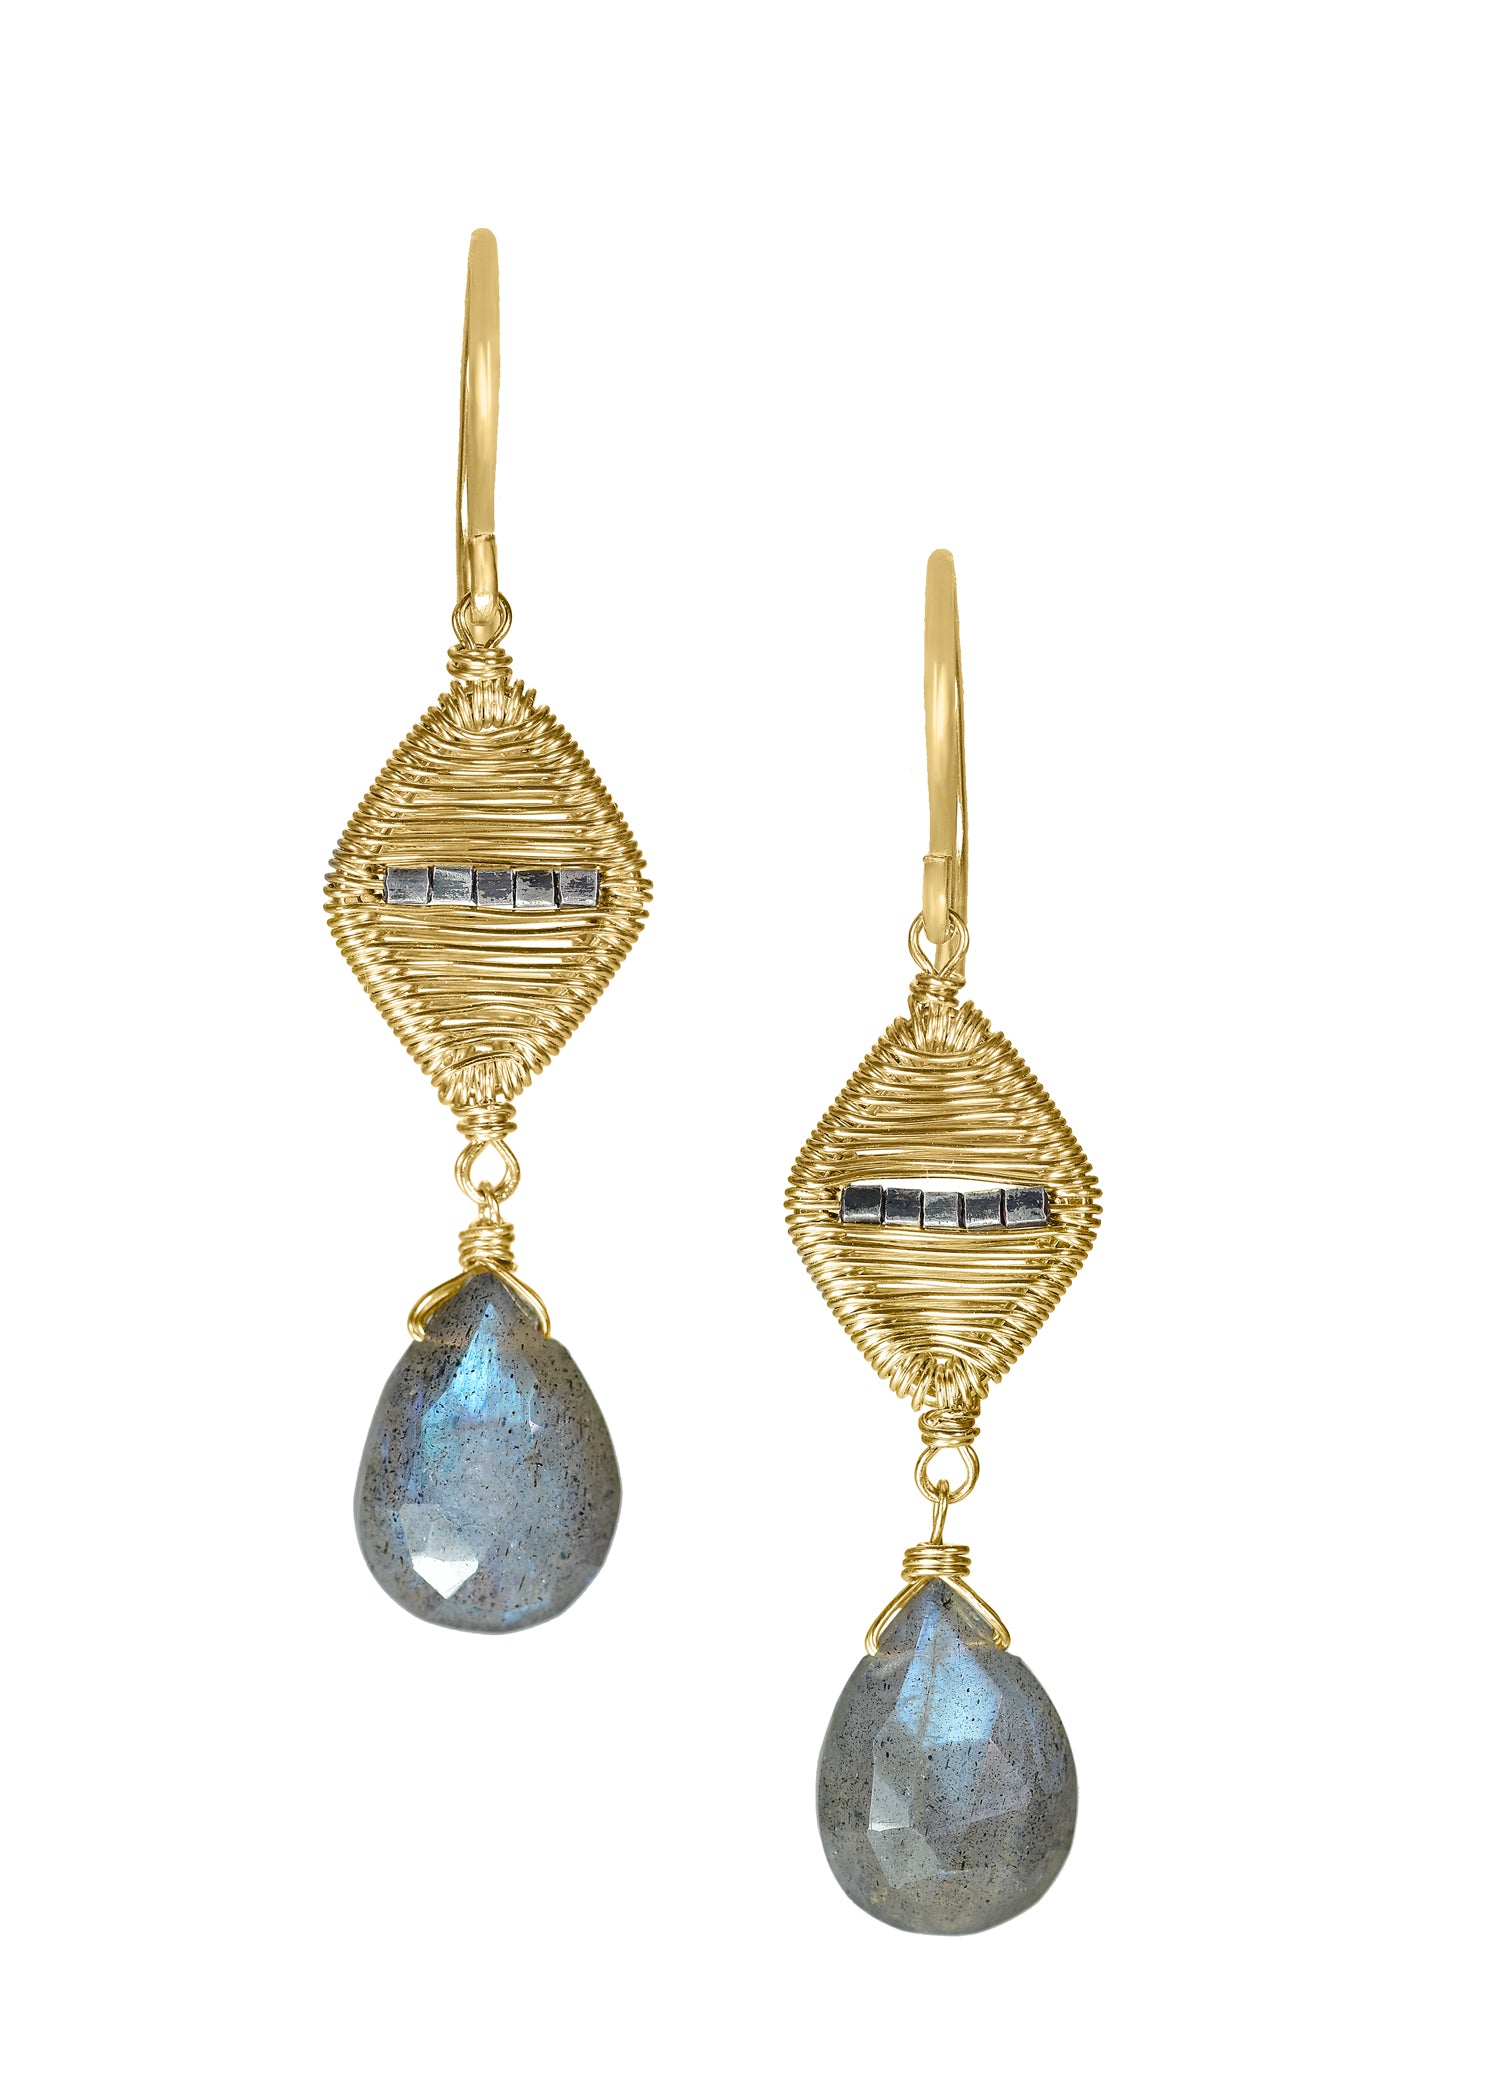 Labradorite 14k gold fill Sterling silver Mixed metal Earrings measure 1-1/2" in length (including the ear wires) and 3/8" in width at the widest point Handmade in our Los Angeles studio